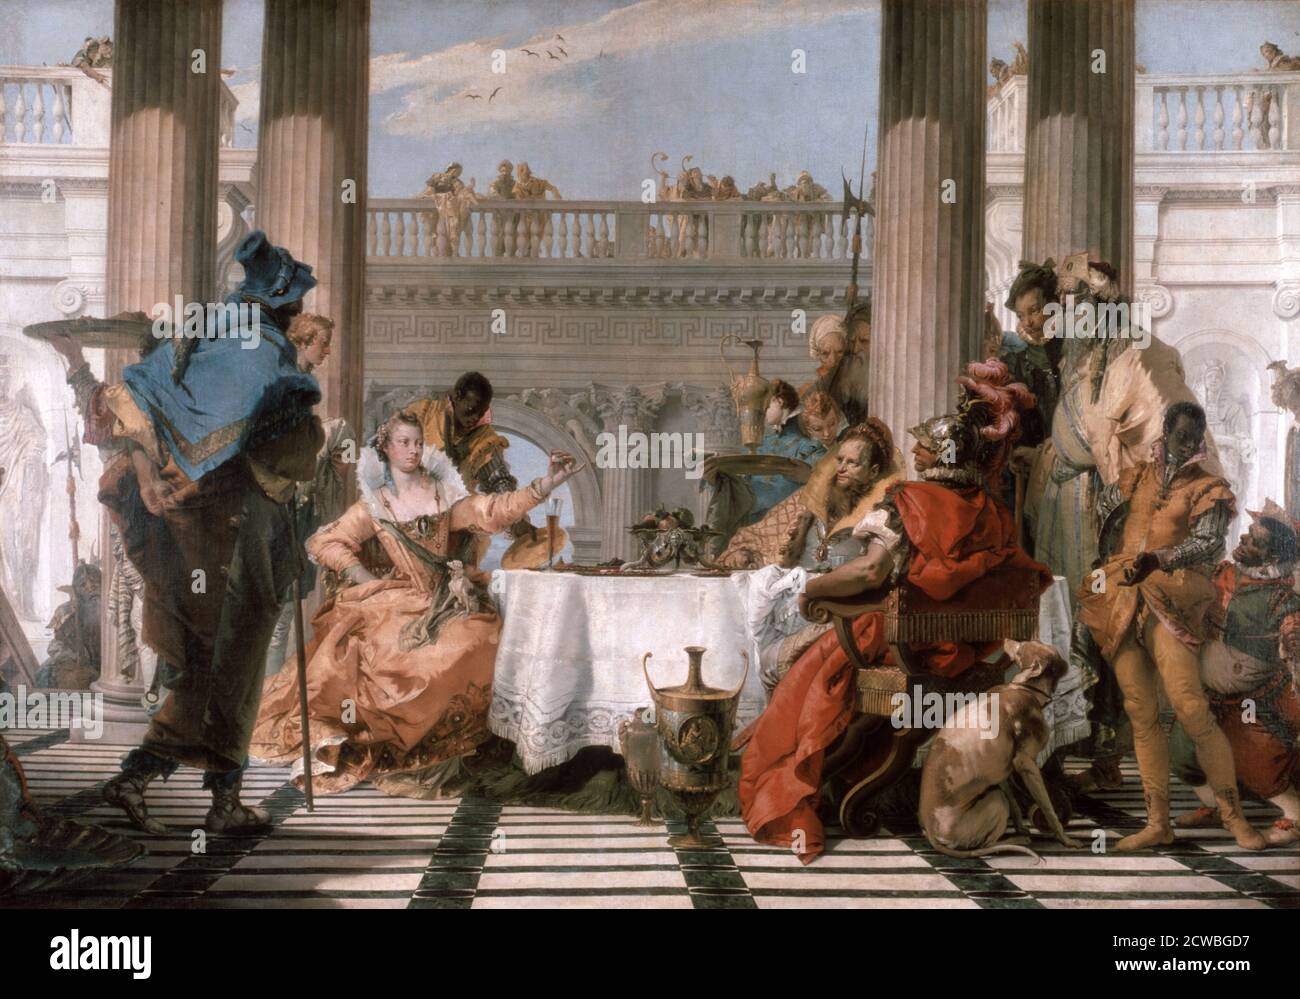 The Banquet of Cleopatra' by Giovanni Battista Tiepolo, 1743-1744. One of the most important commissions carried out by Tiepolo in the 1740s was, without a doubt, the decoration of the Palazzo Labia in Venice. Tiepolo's scenes, The Meeting of Anthony and Cleopatra and The Banquet of Cleopatra, are staged within an illusory architecture, the scenic framework lending them a theatrical character. From the collection of the National Gallery of Victoria, Melbourne, Australia. Stock Photo